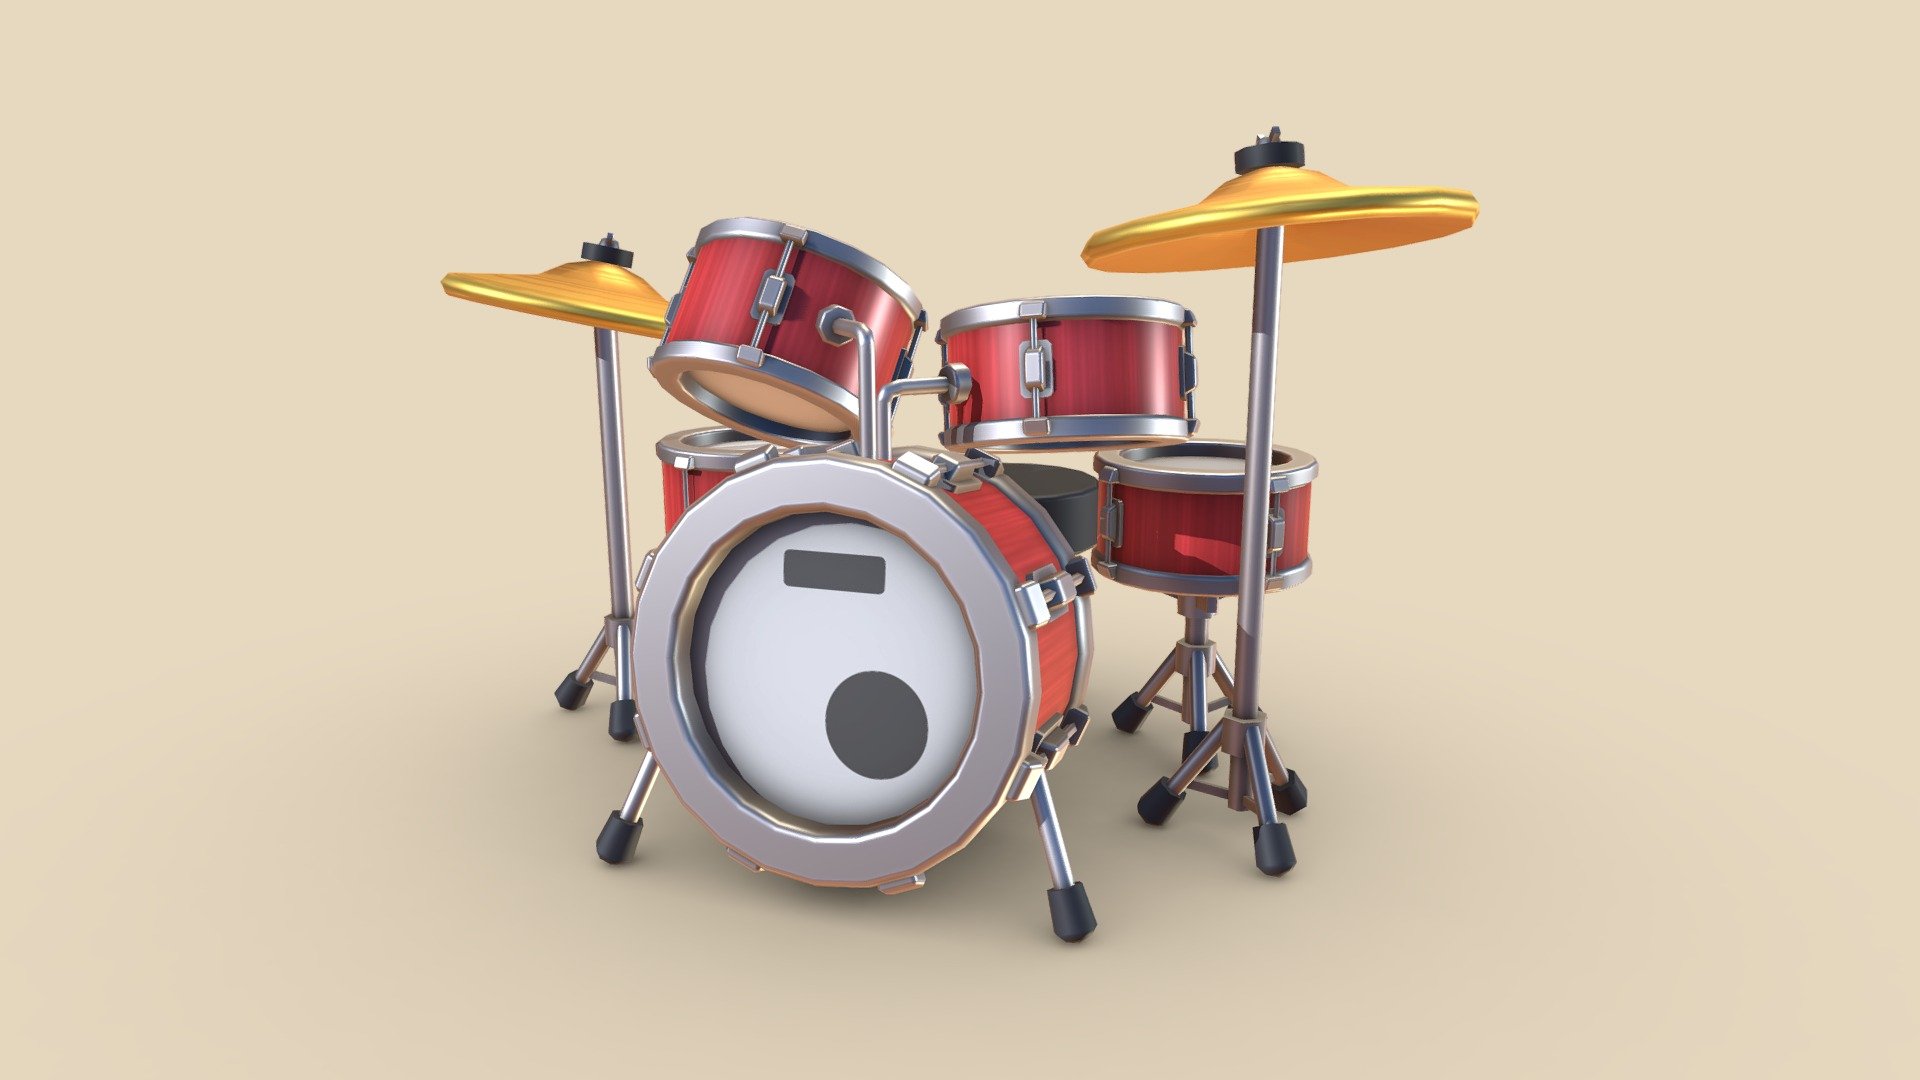 Part of a musical instrument set. This one is a stylized drum kit!

See the rest of the set on artstation: https://www.artstation.com/artwork/oOLV6q - Chunky Drum Kit - 3D model by autumnpioneer 3d model